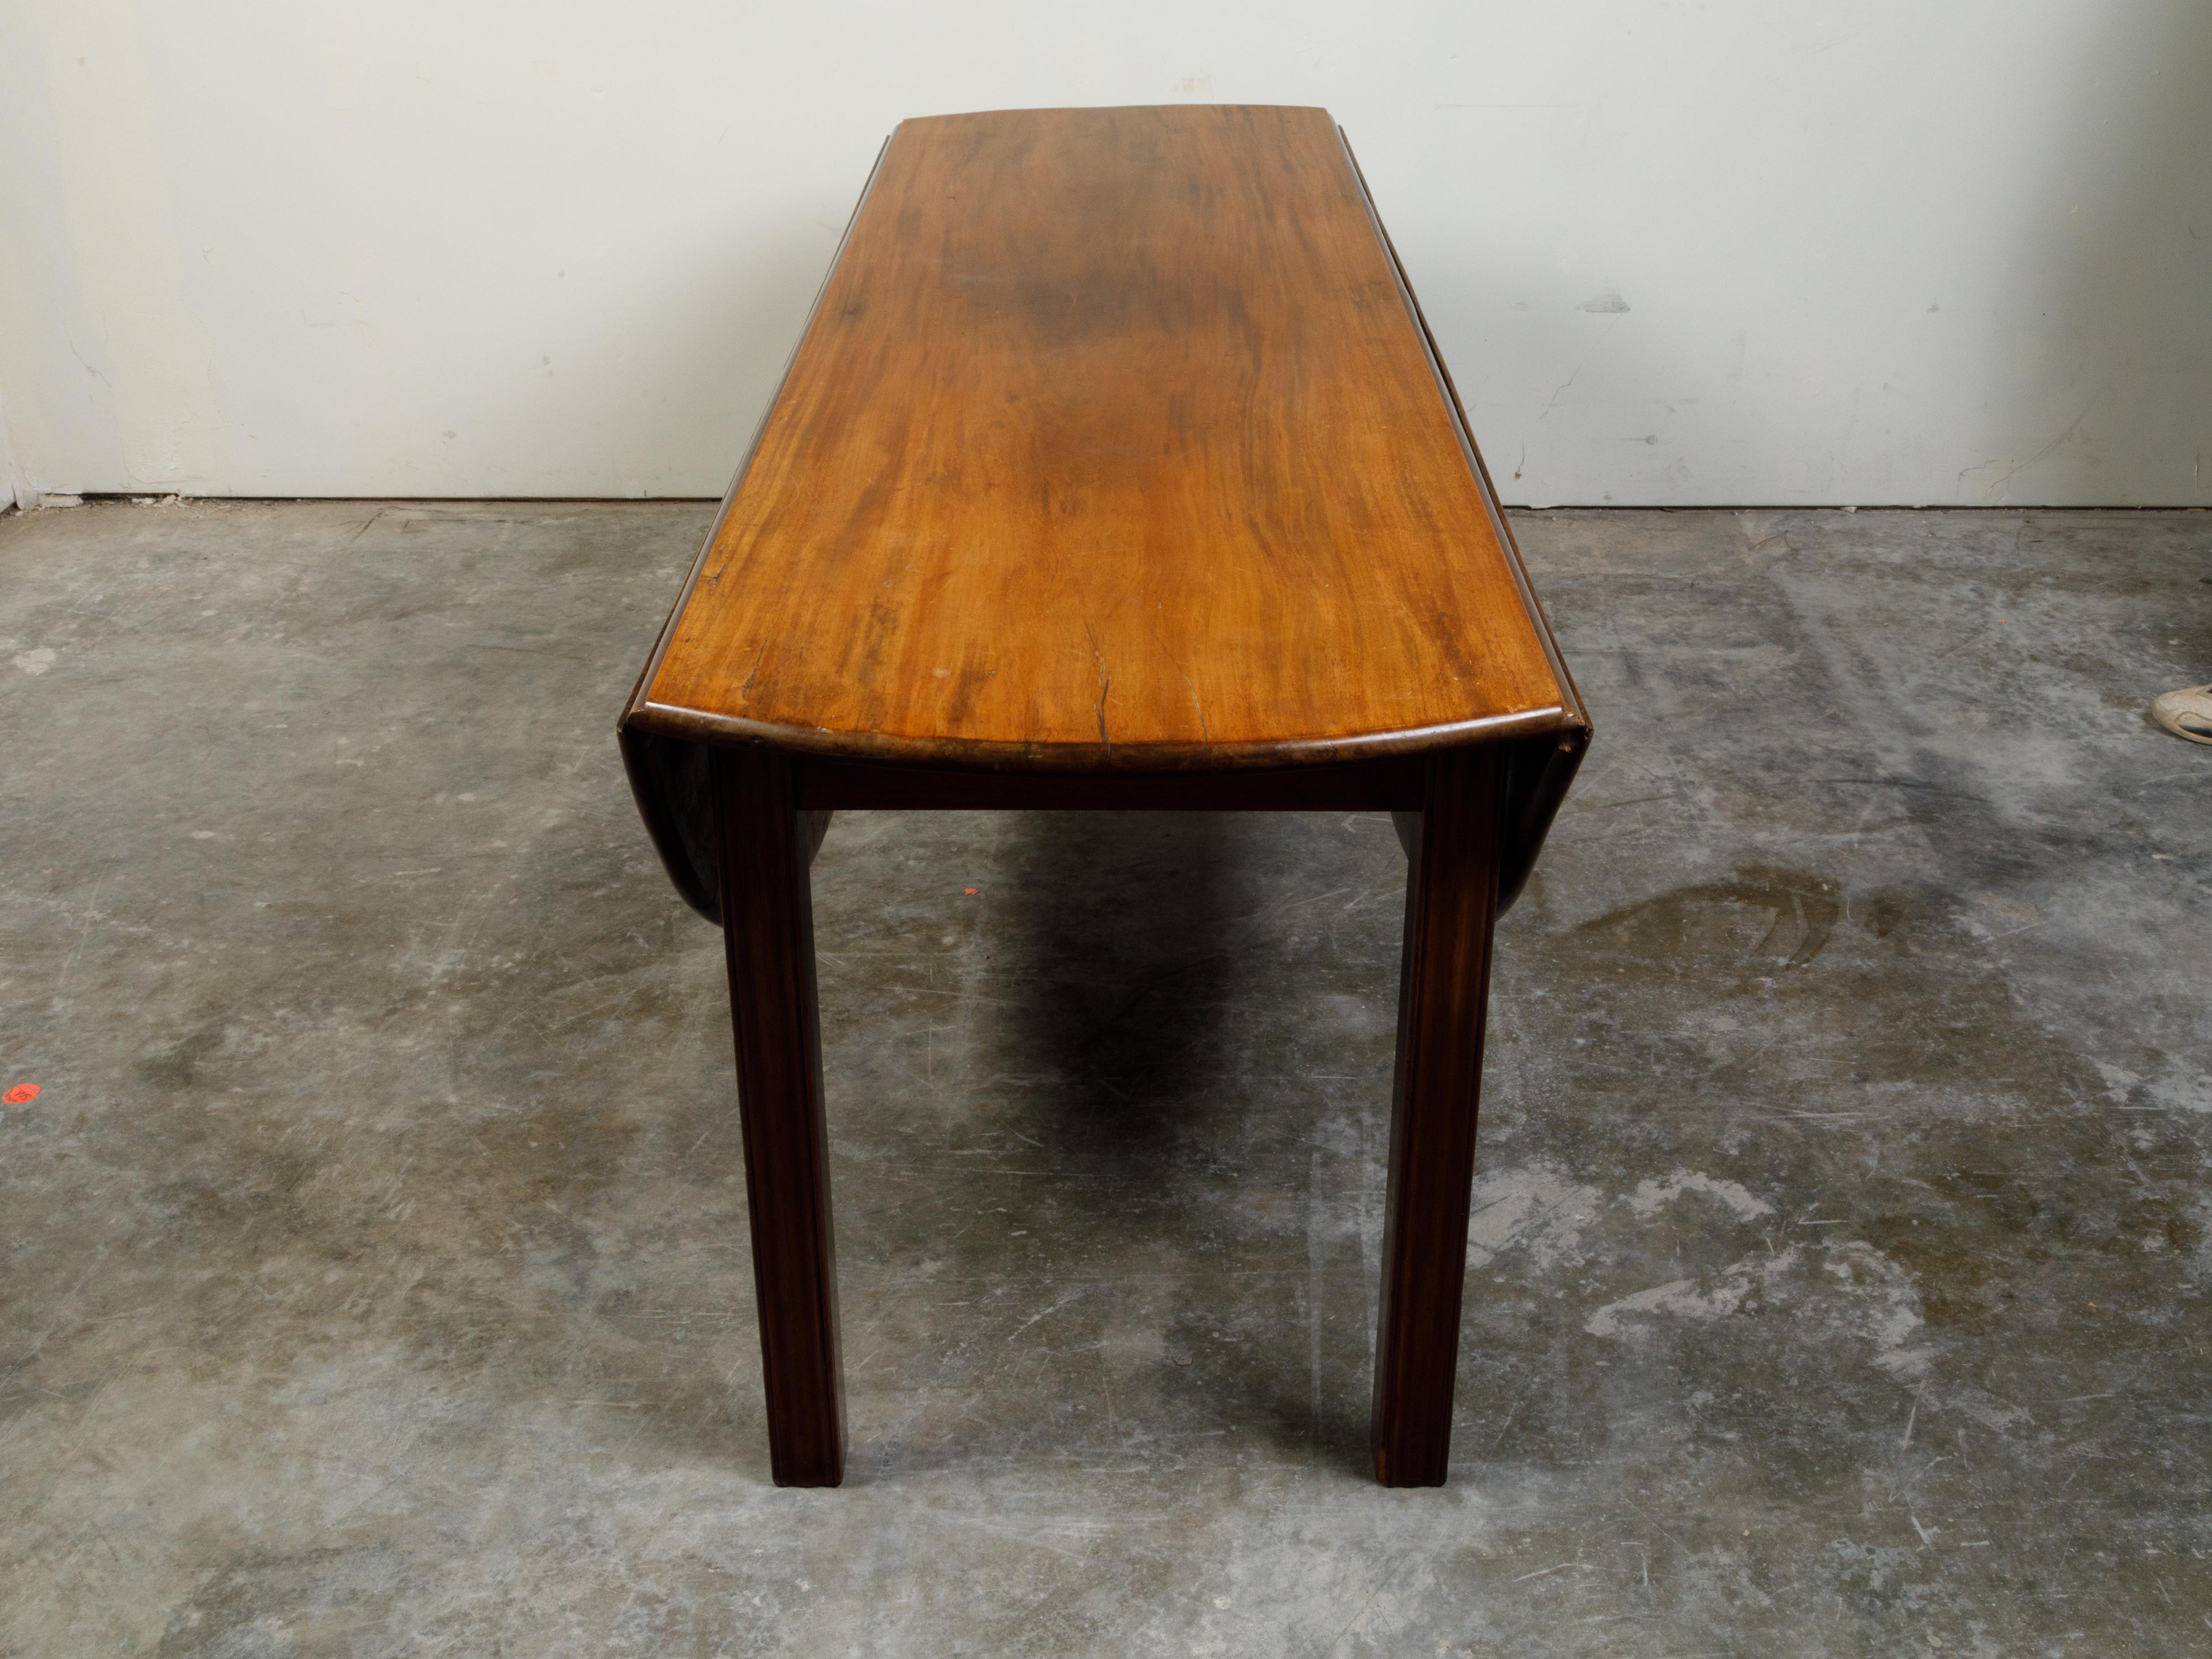 19th Century English Walnut Drop-Leaf Table with Oval Top and Straight Legs For Sale 6